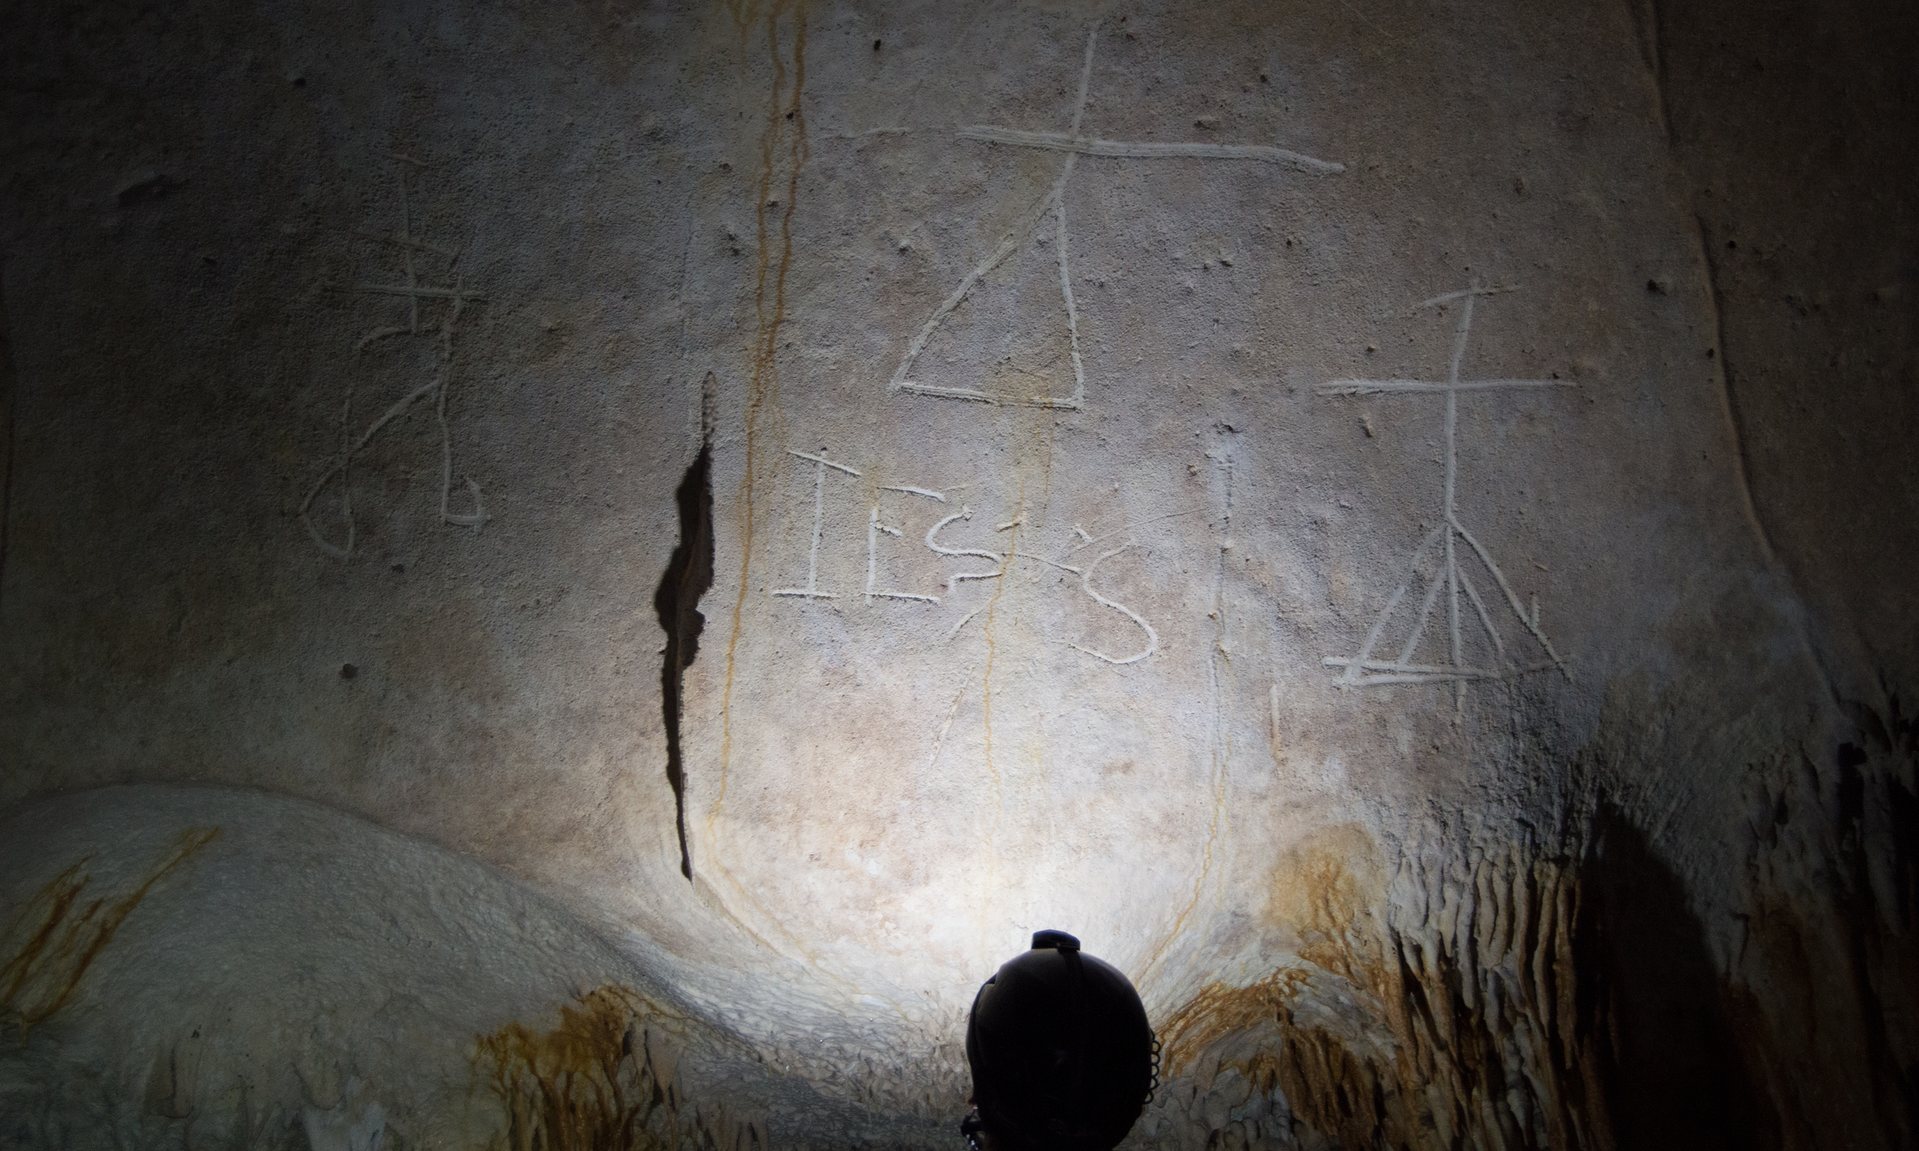 Archaeologists have discovered 16th-century Christian symbols left by European explorers alongside ancient indigenous art in the Caribbean, shedding new light on early religious dialogue between Europeans and Native Americans.